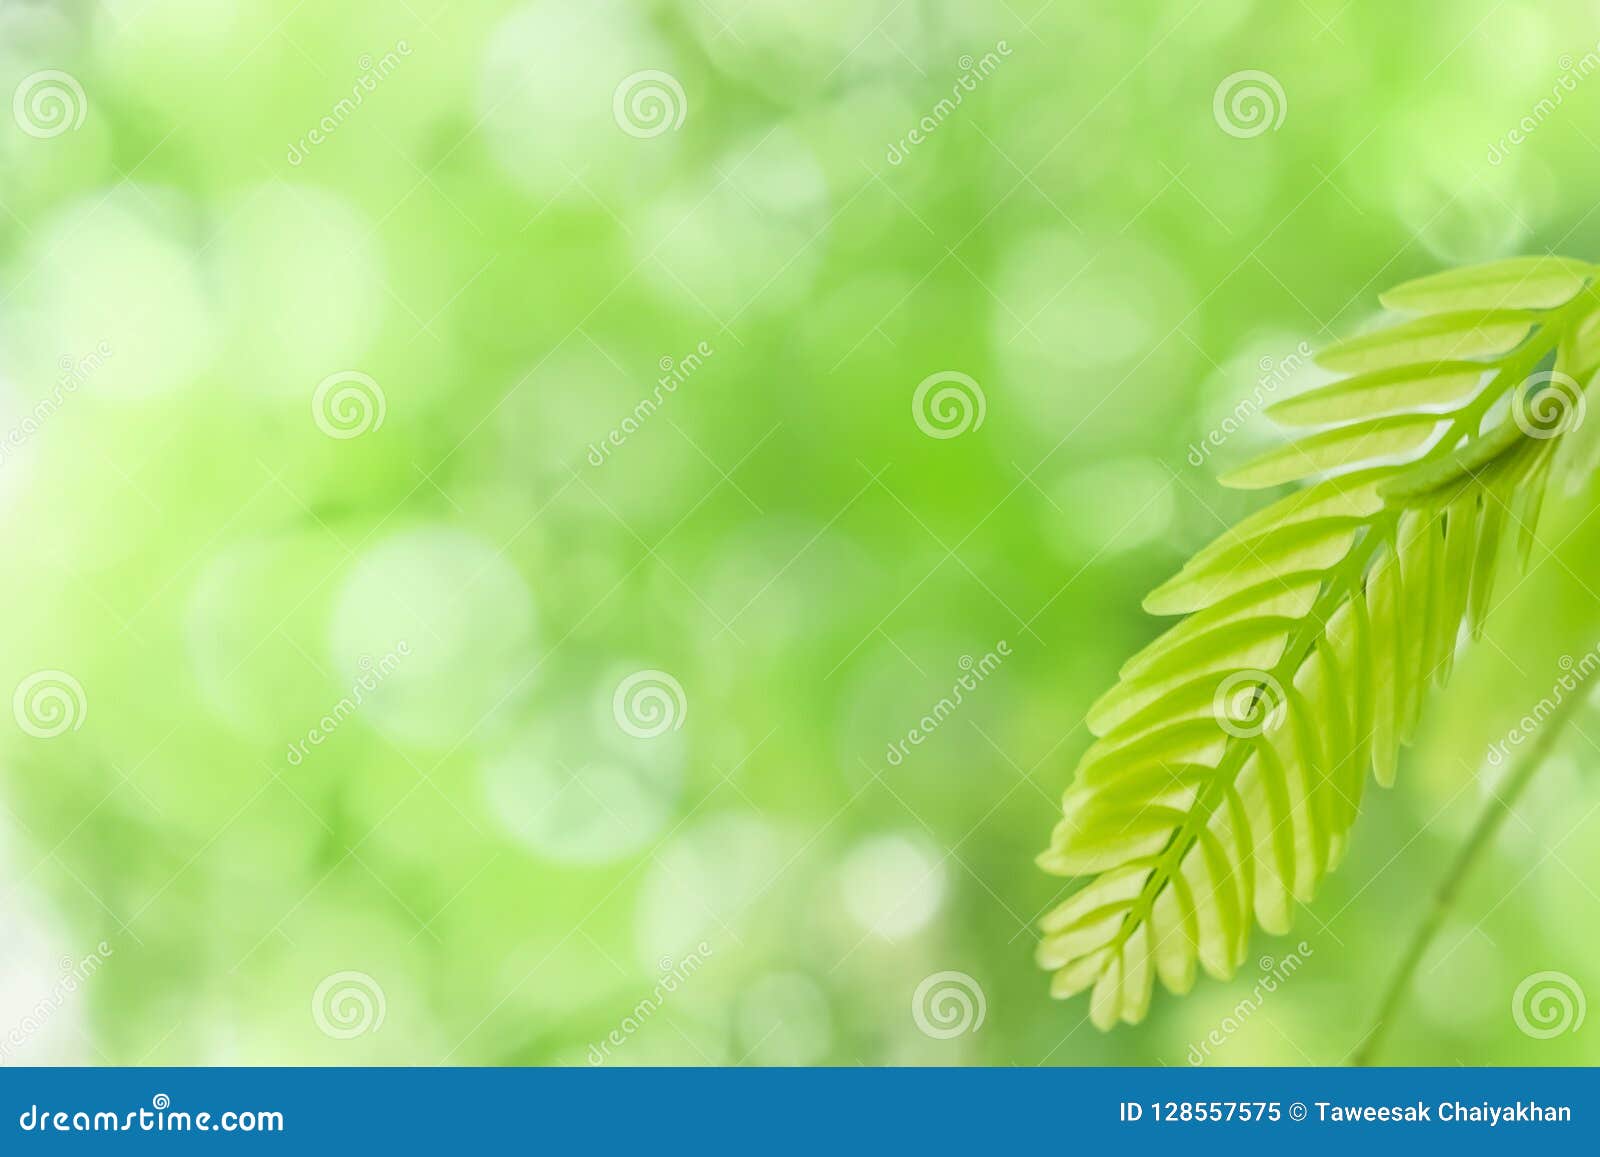 Natural Light Blur on Green Leaf Background Abstract Stock Image - Image of  design, background: 128557575